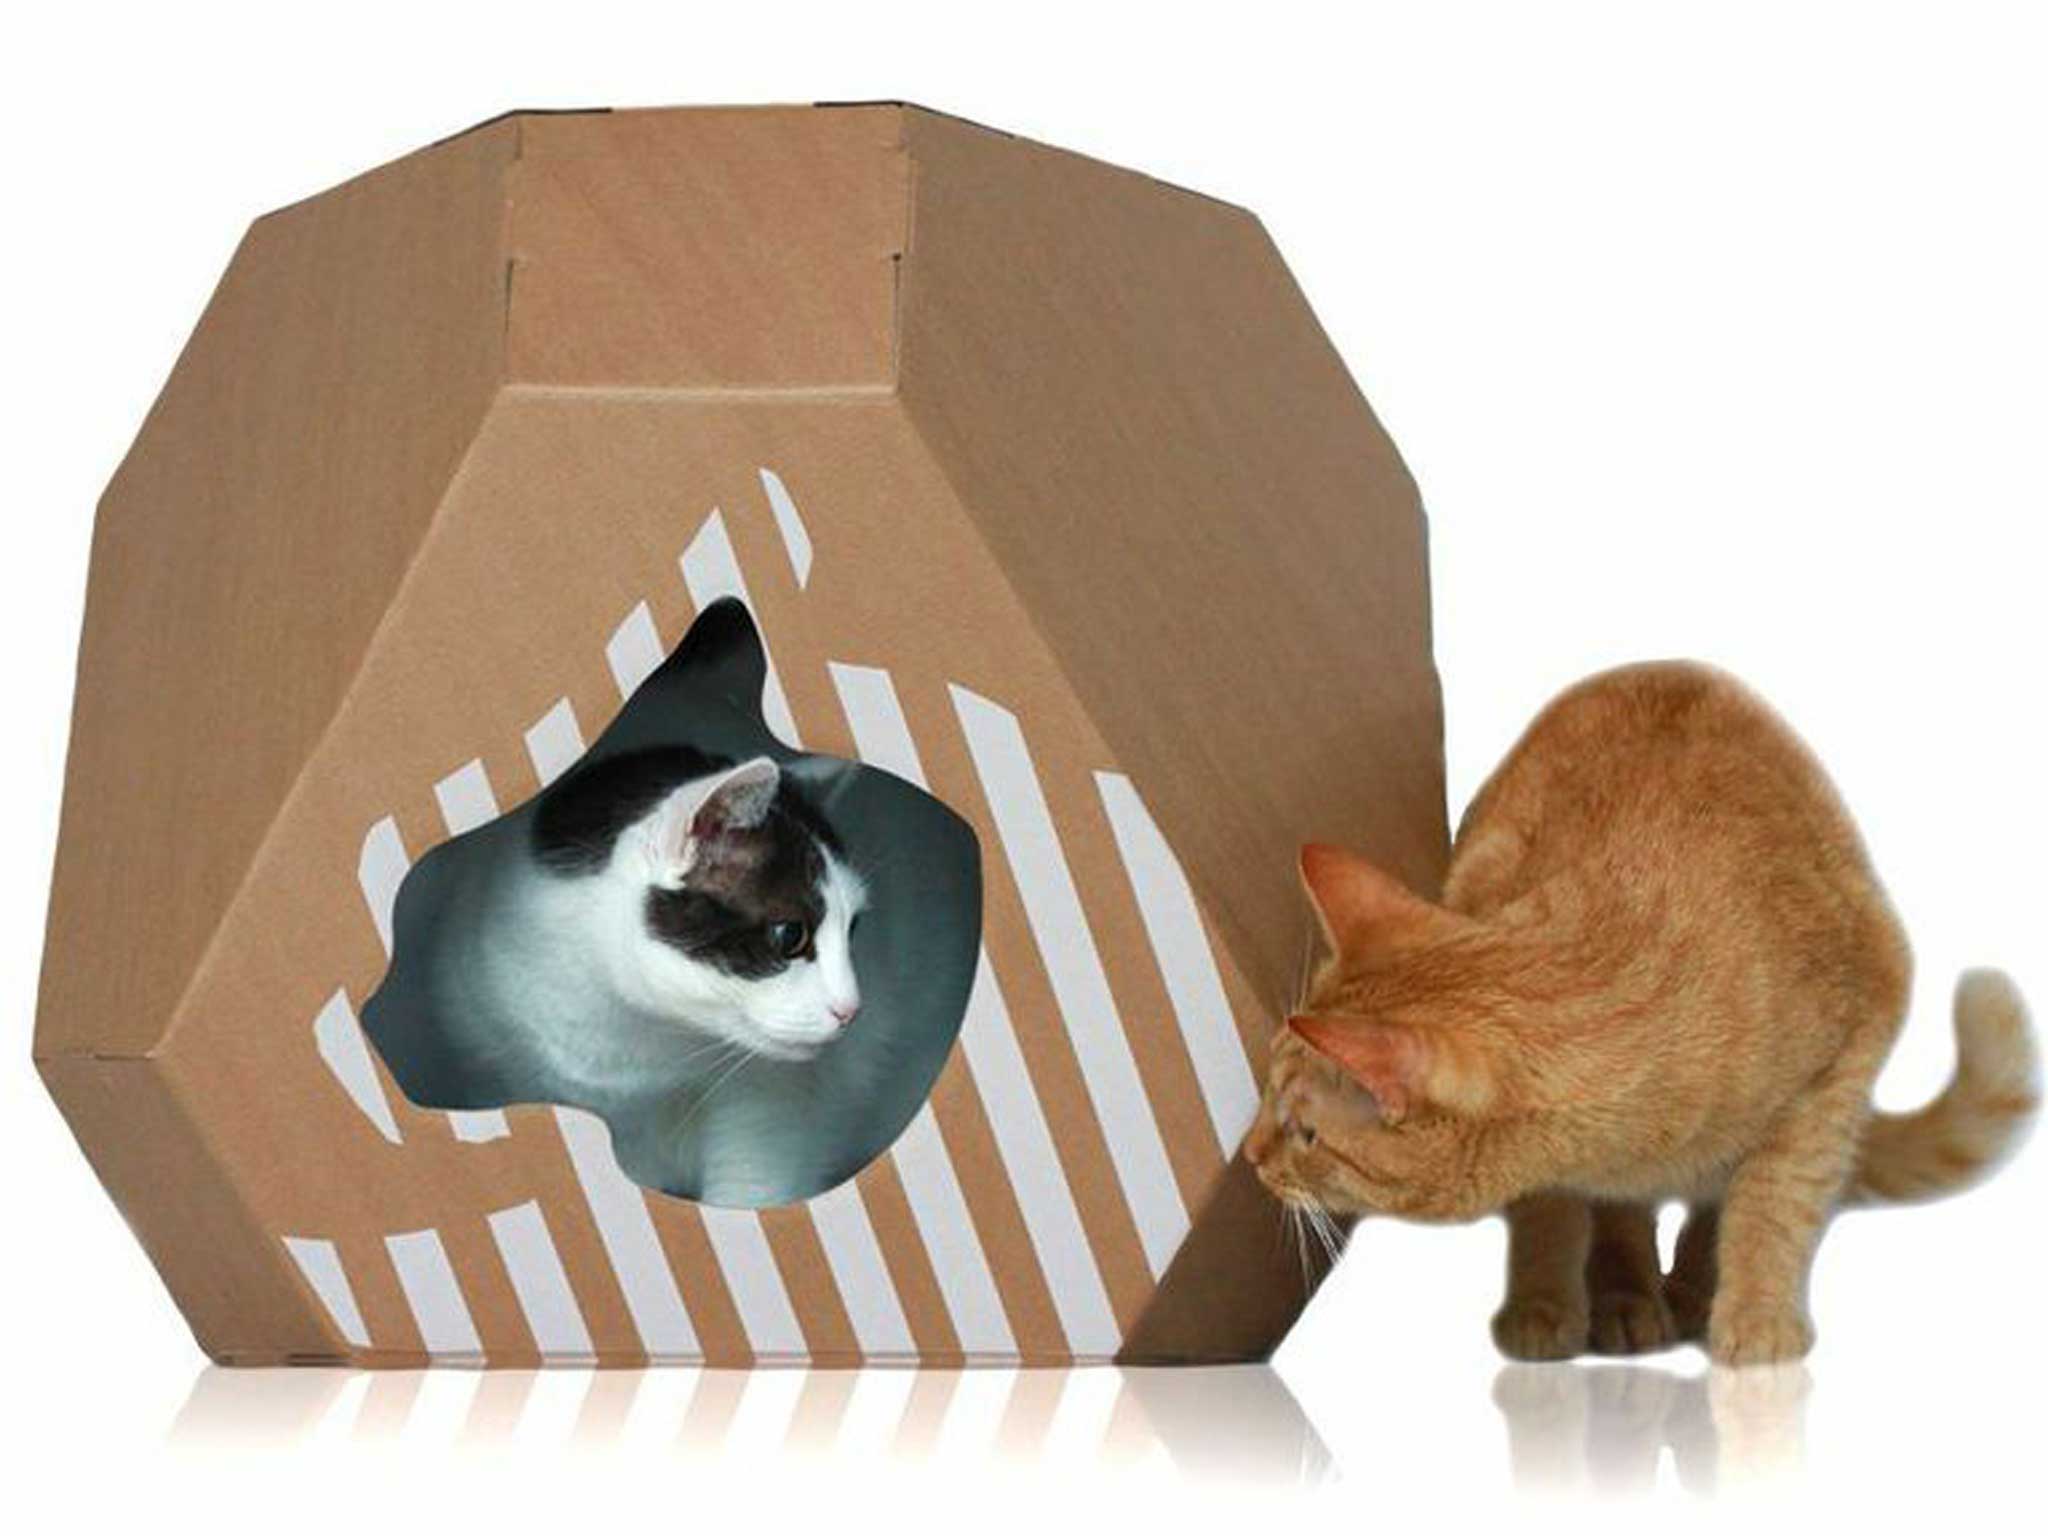 Kittens and Small Pets Durable Washable Comfortable Crate Pad Cushion Small Cat Bed House Pad Nest Indoor Cat House for Living Room succeedtop Scratchy Box Cardboard Cat Scratcher for Cats 